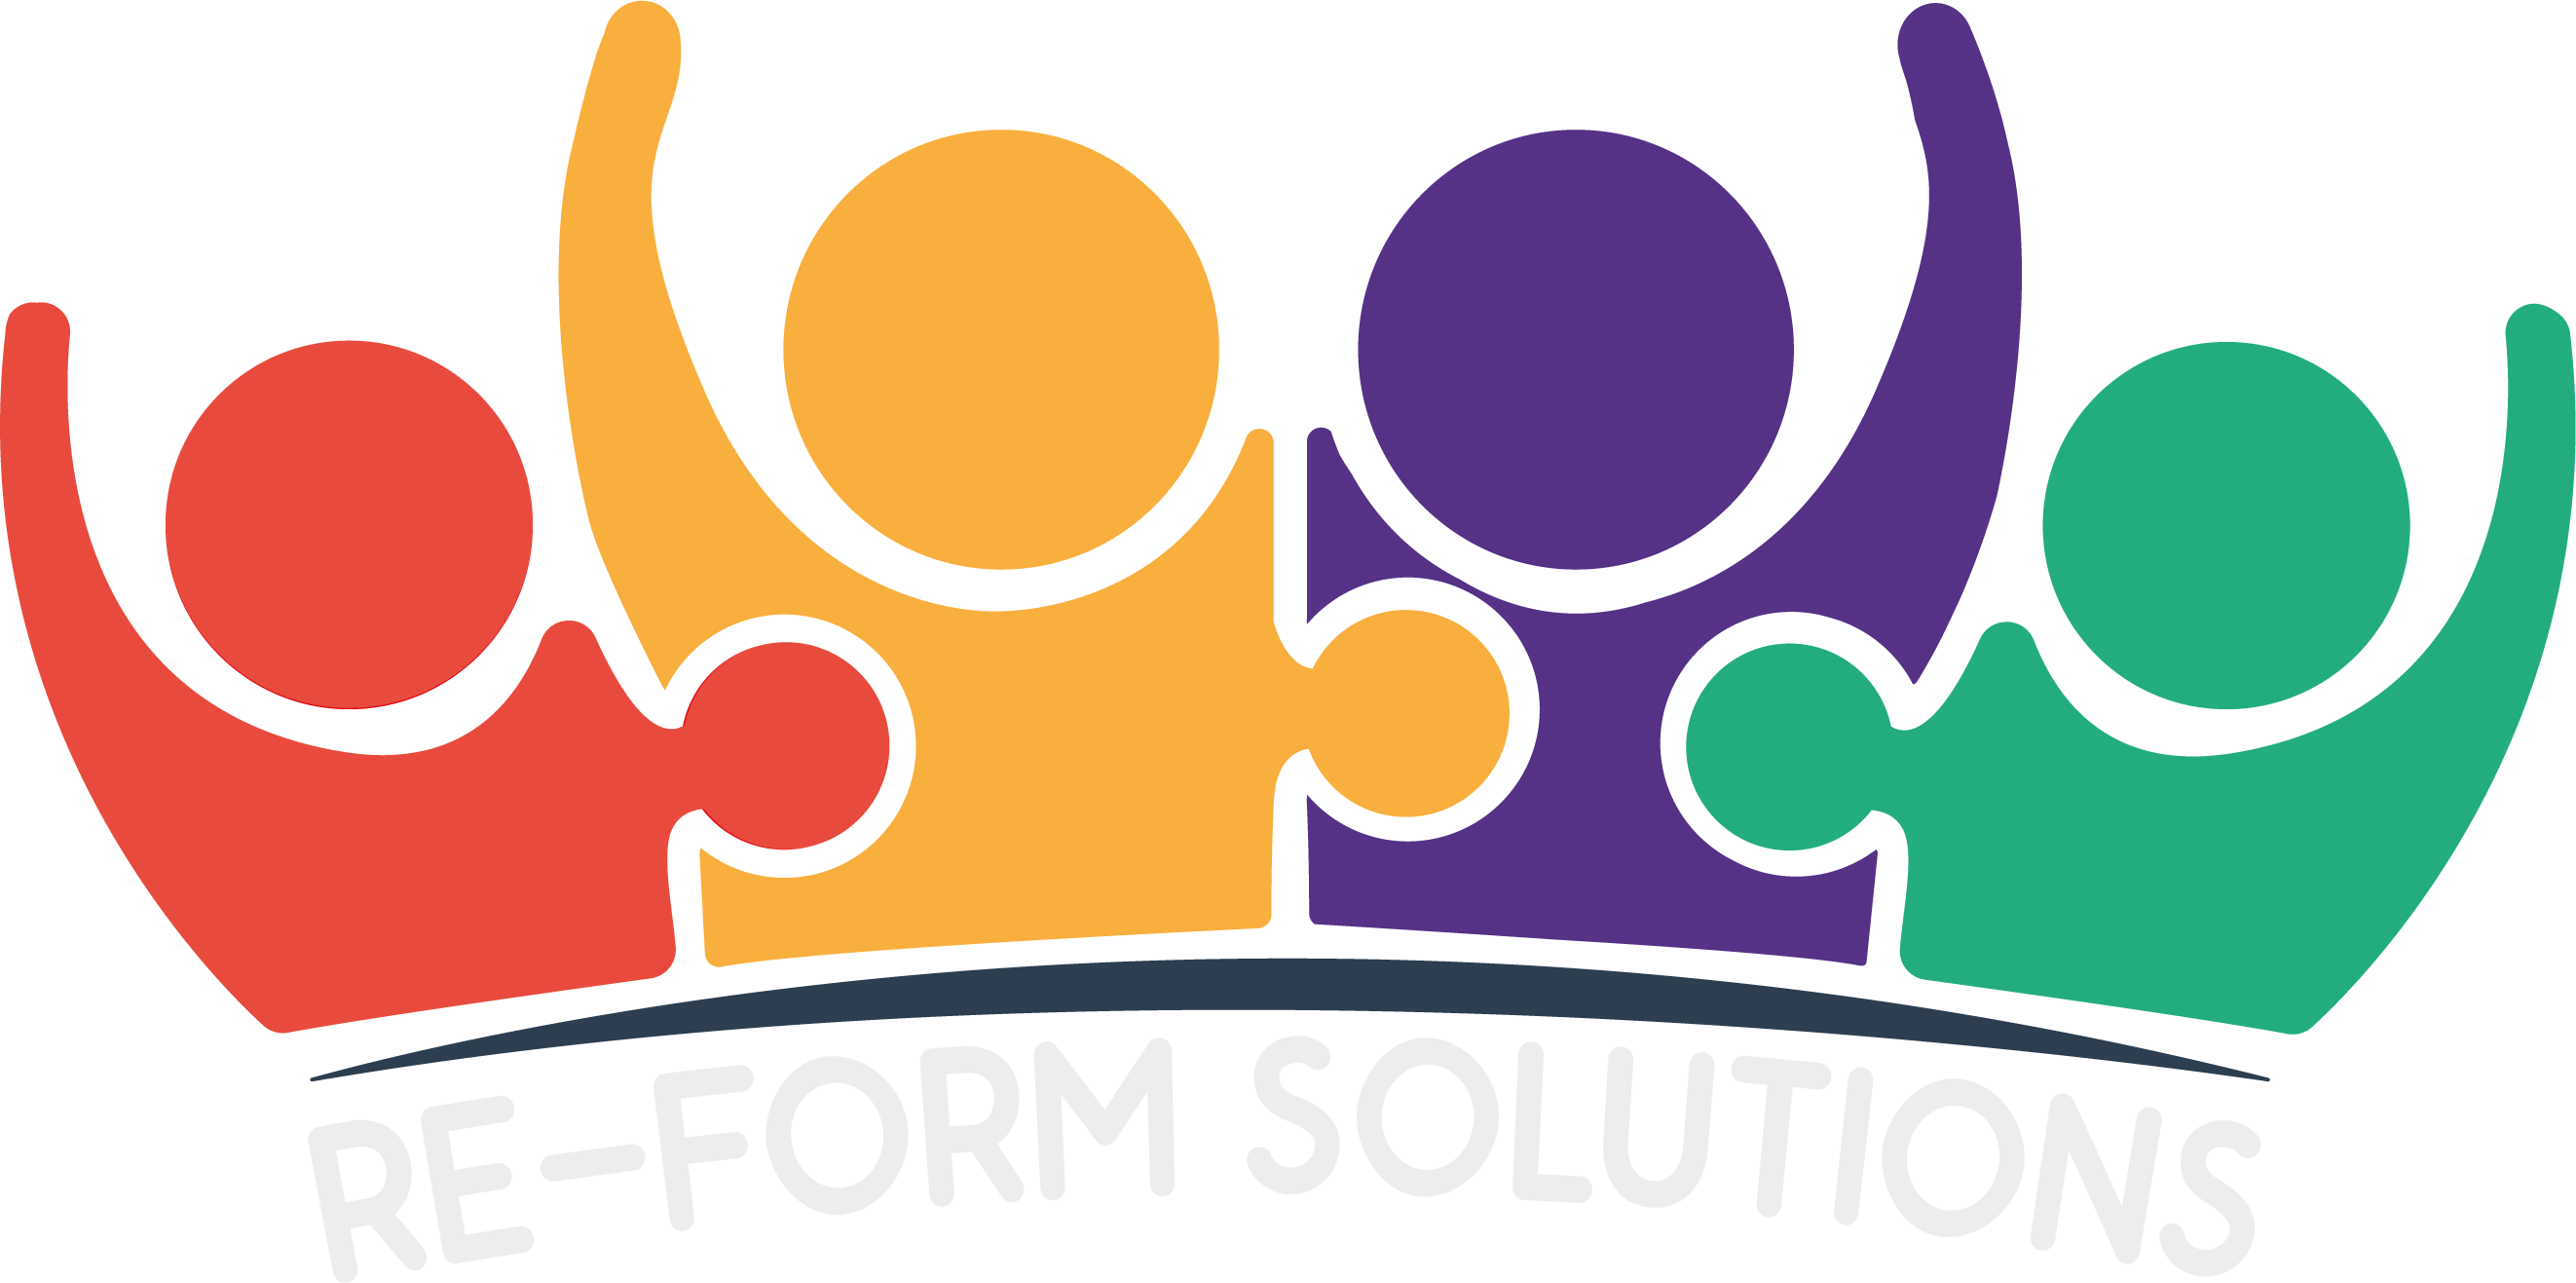 Re-Form Solutions